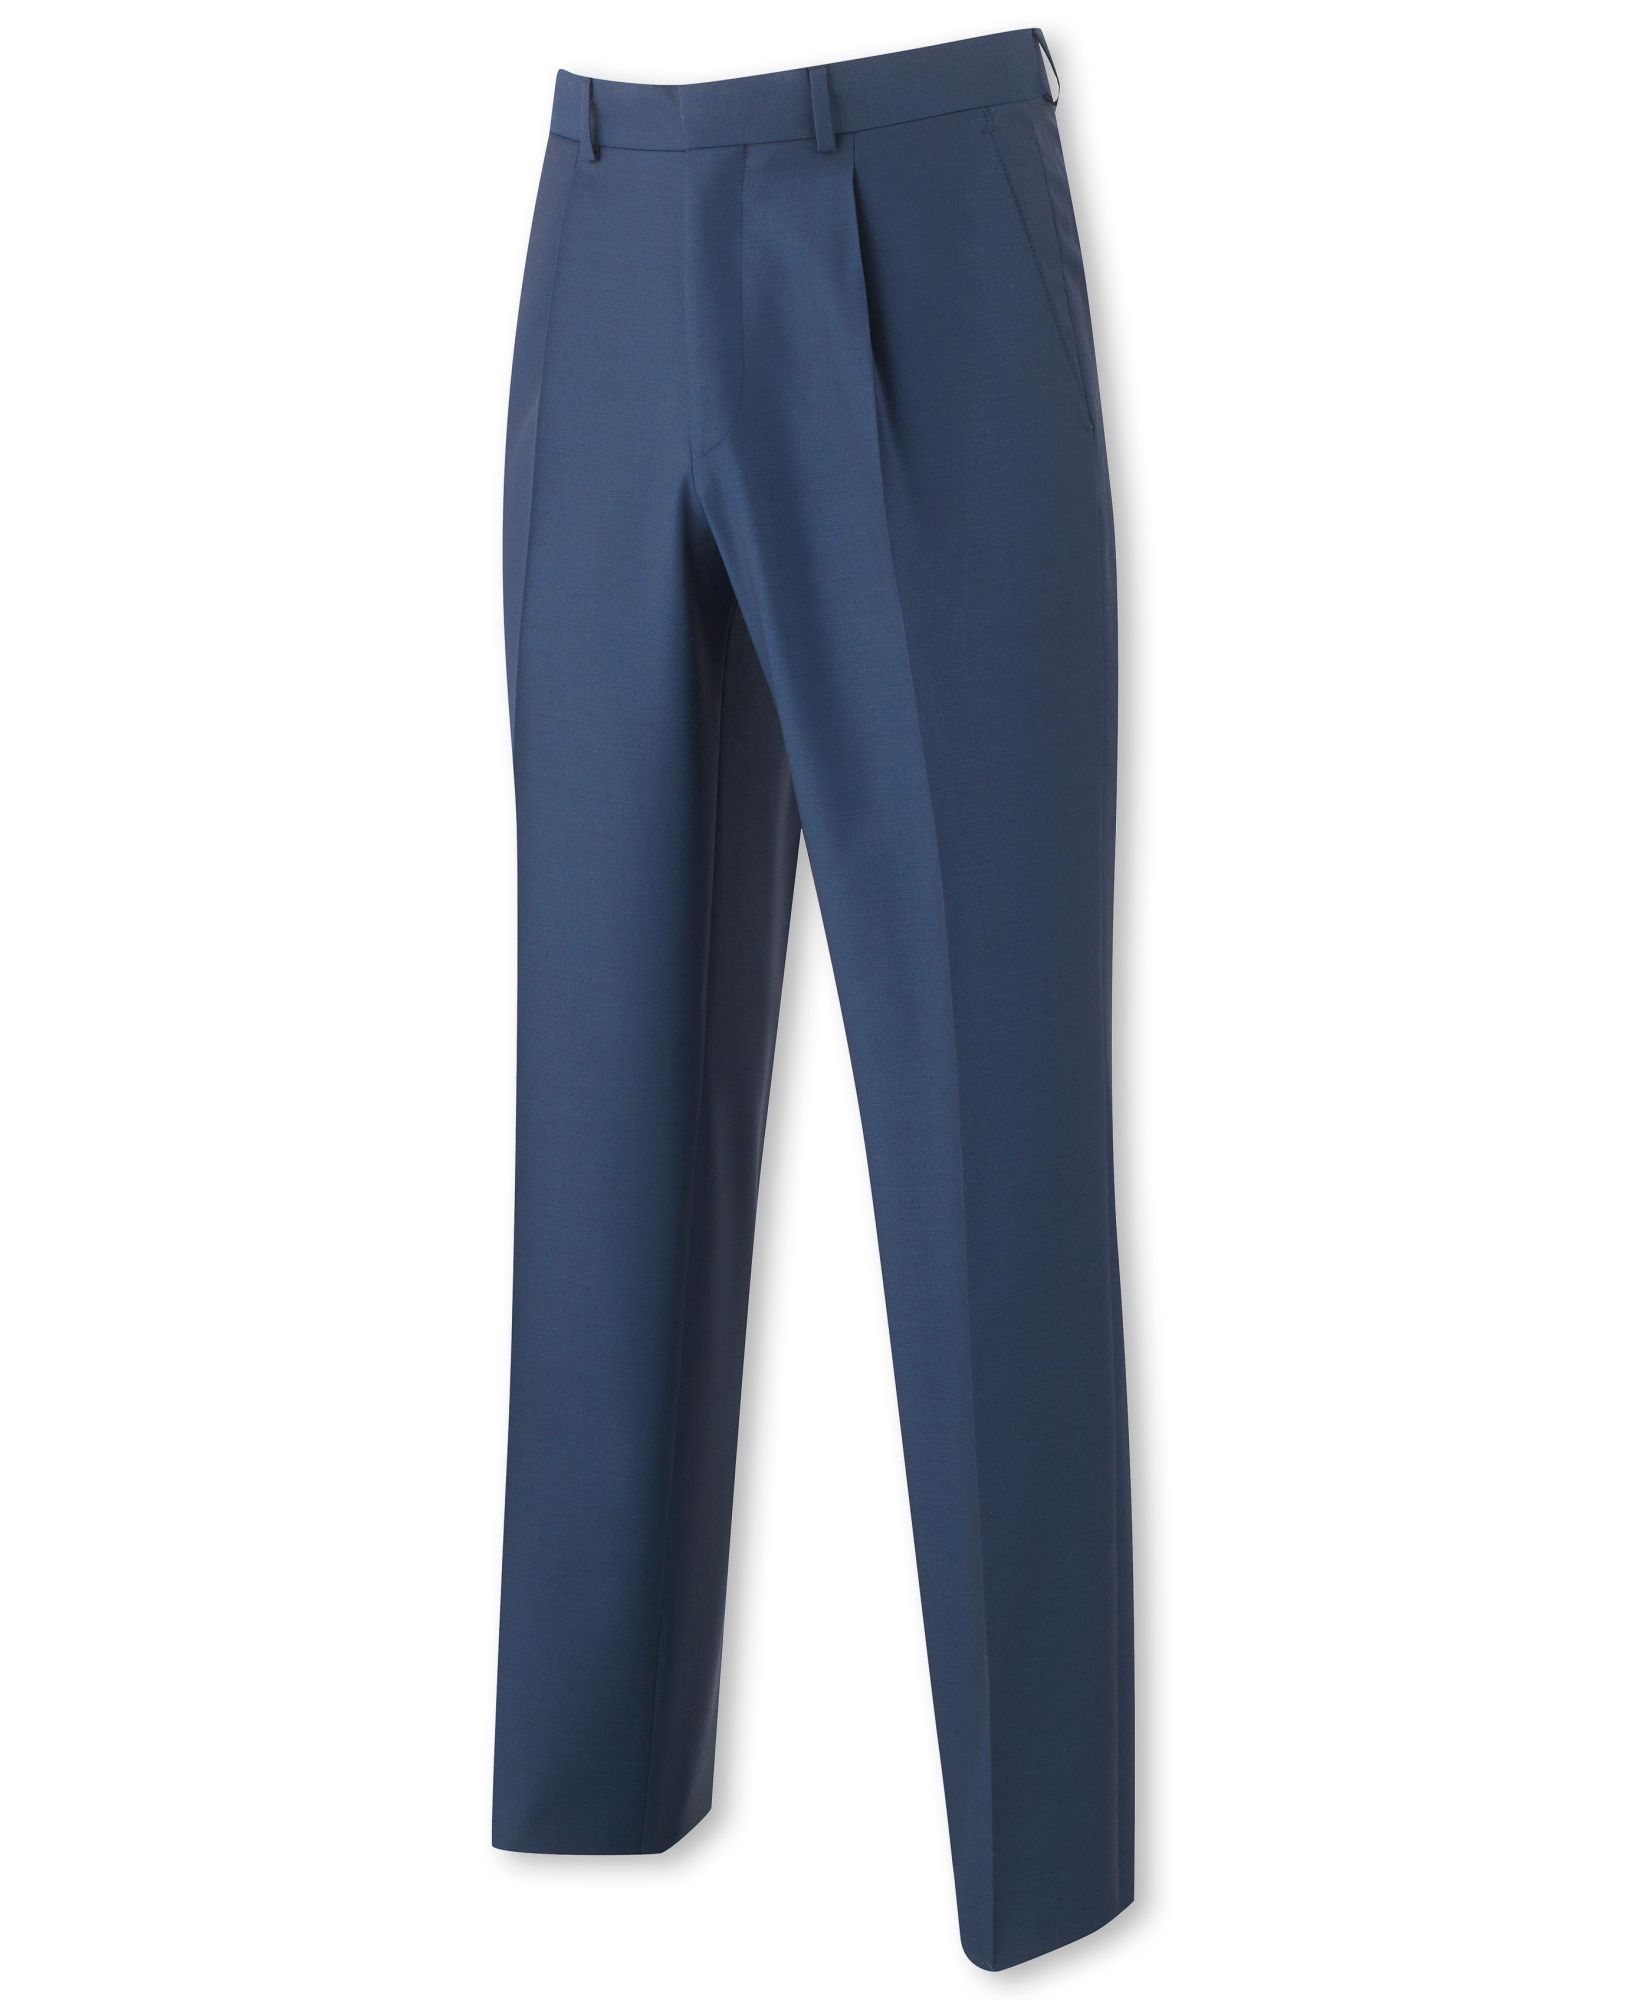 Bright Navy Classic Fit Pleated Trousers 30